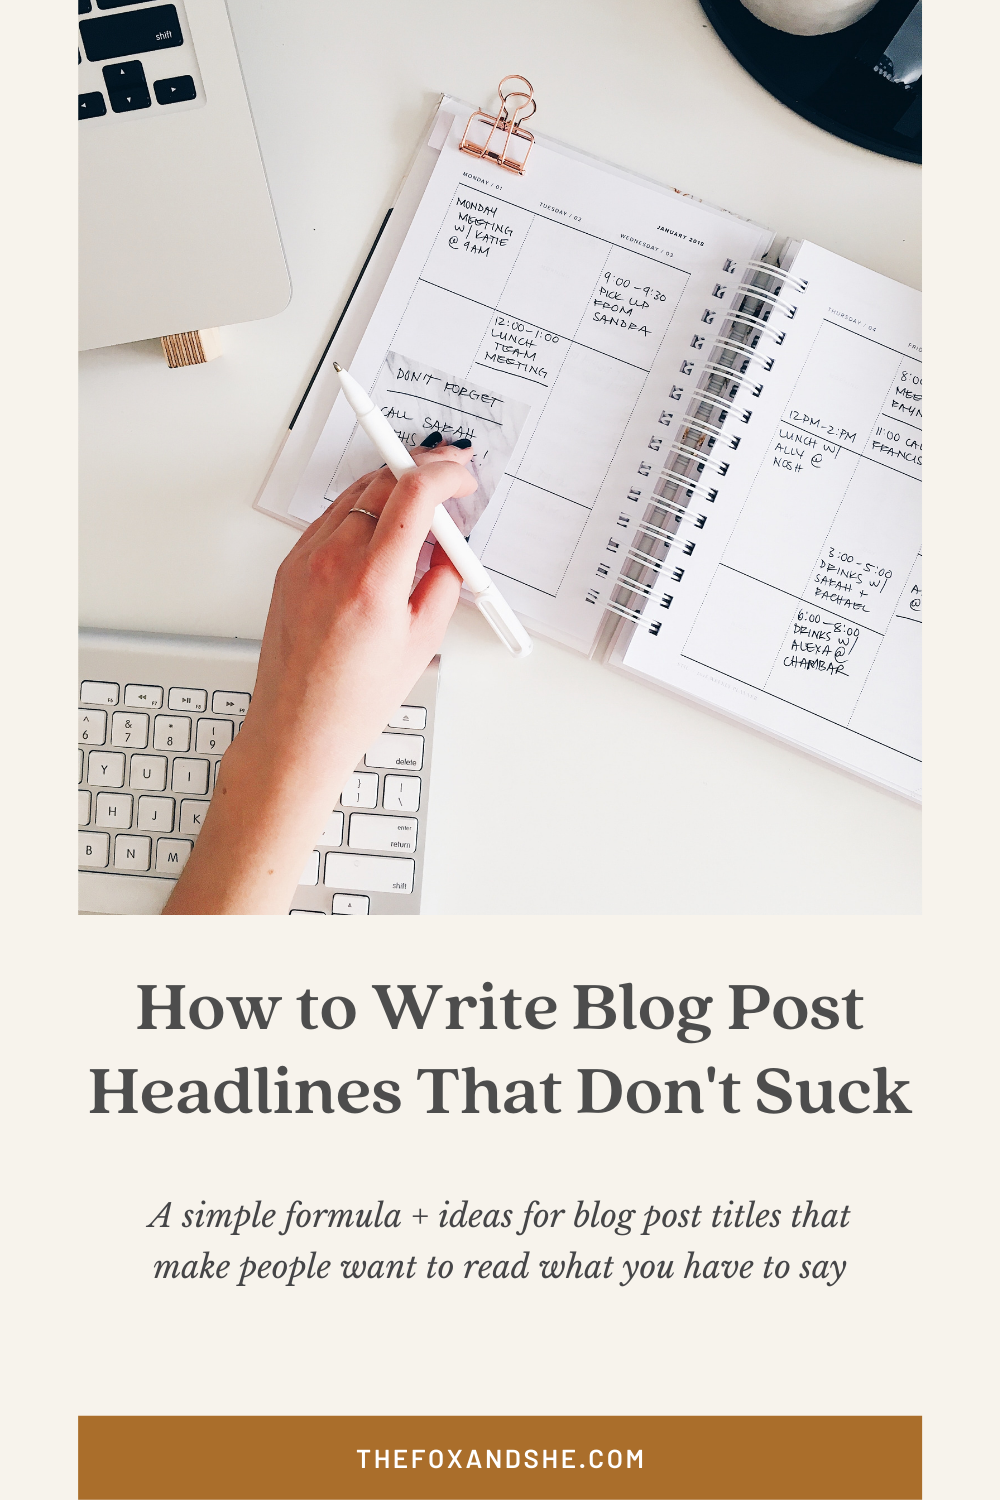 How to Write Blog Post Titles That Don't Suck—6 types of blog post headlines that get more attention and clicks | TheFoxandShe.com